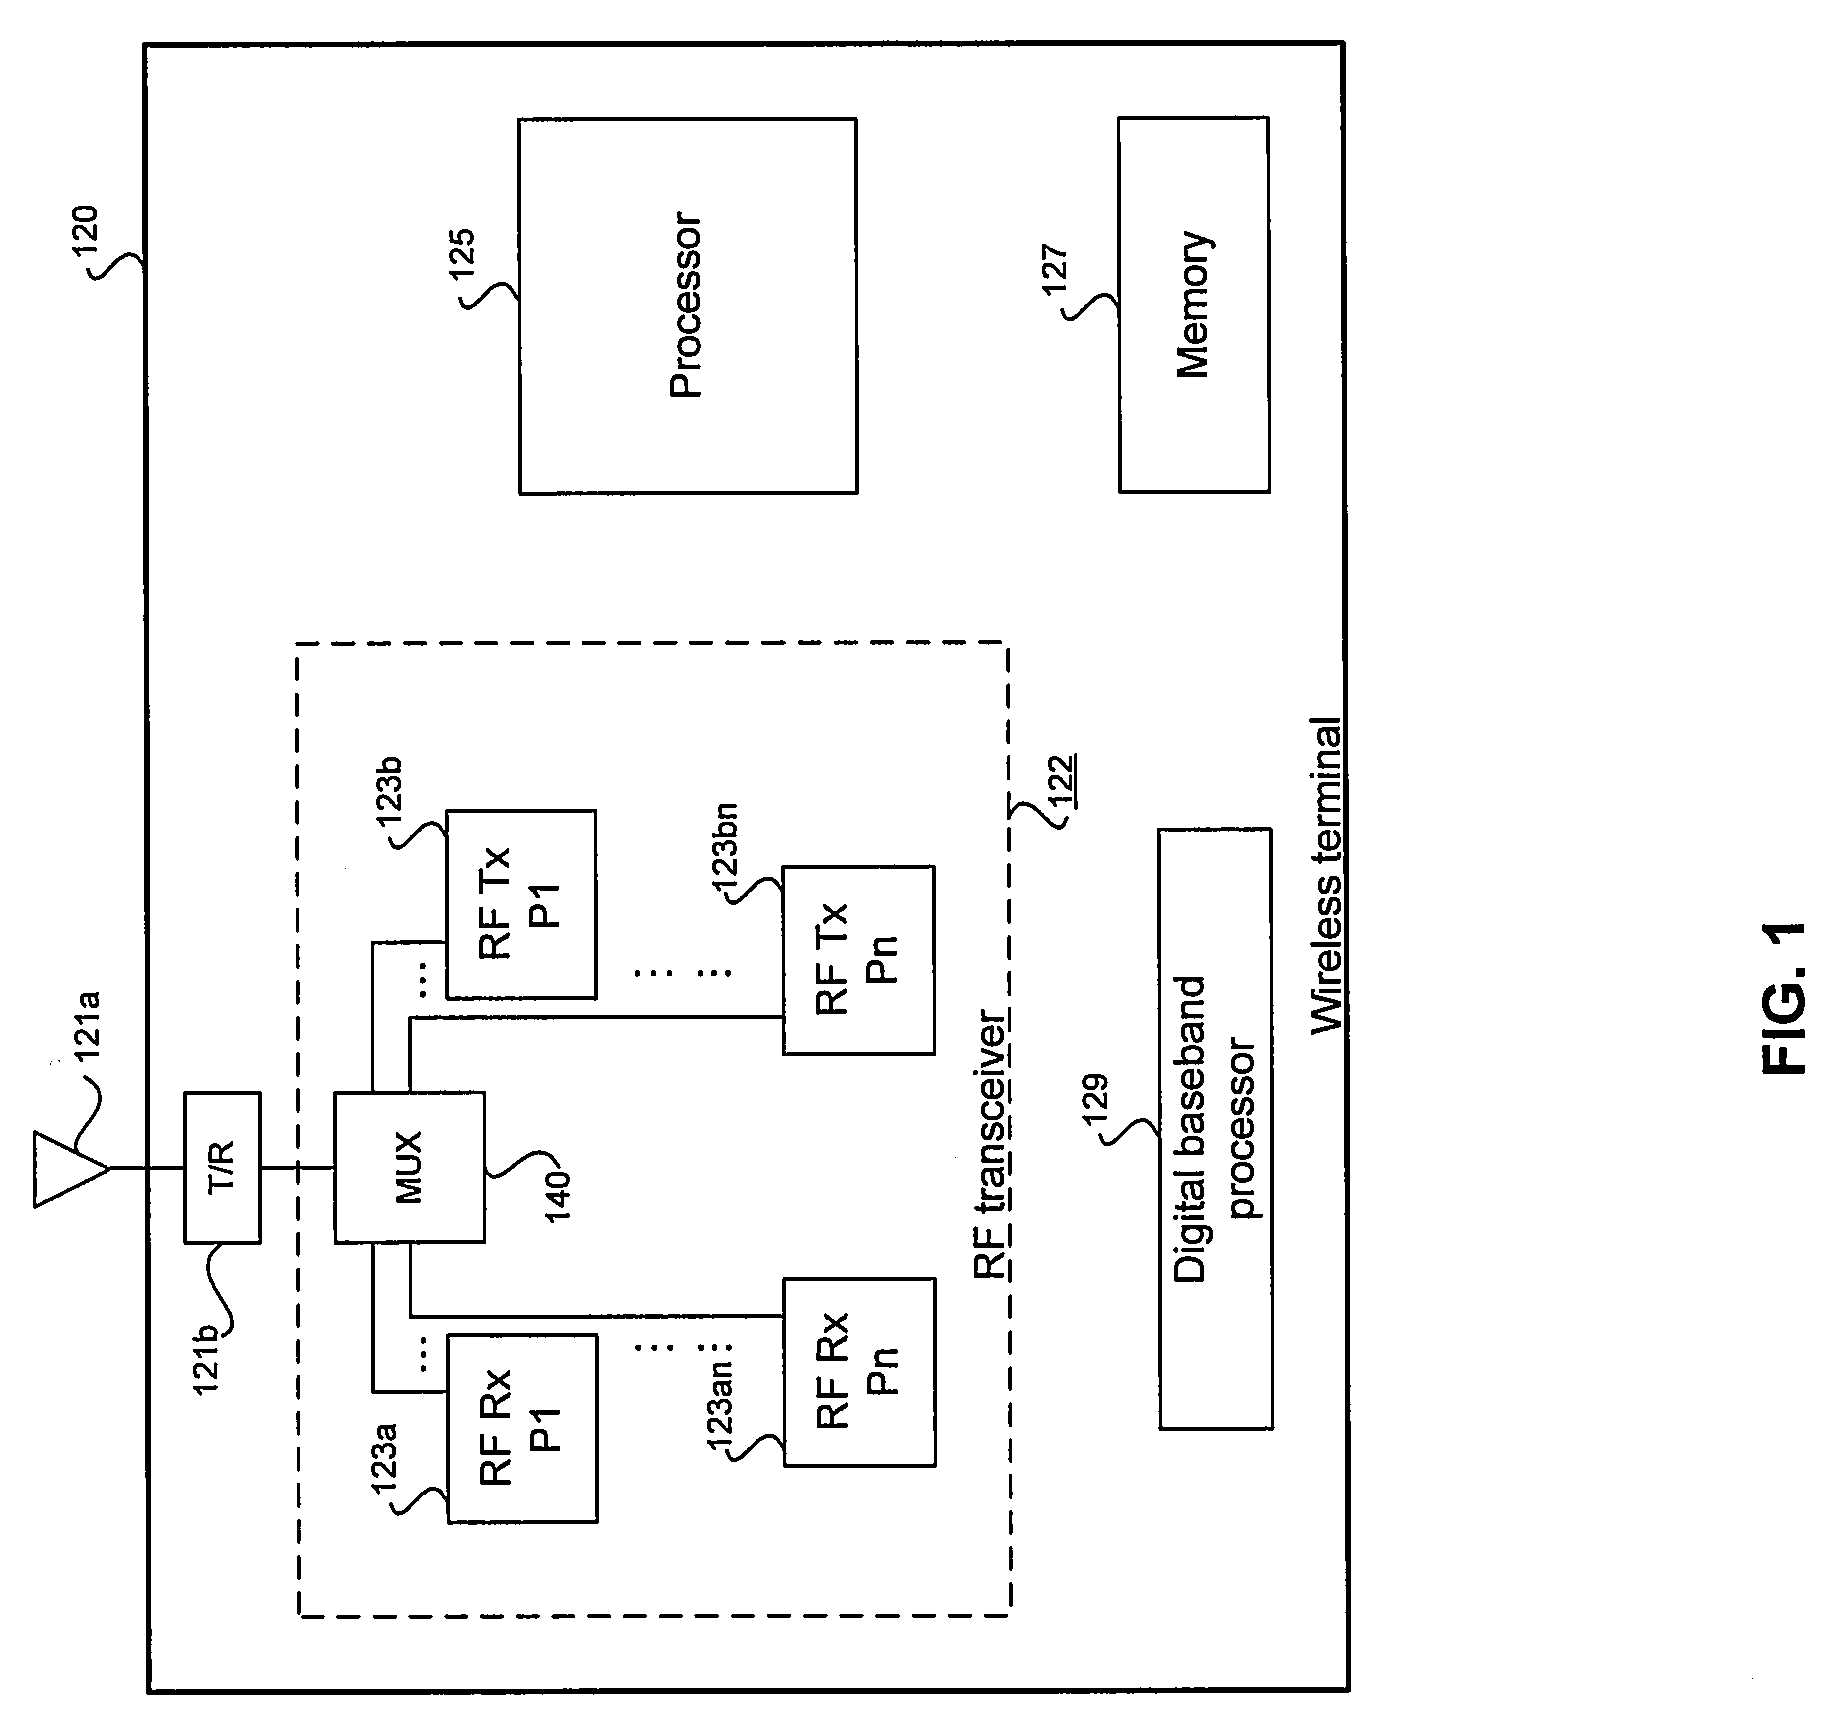 Method and System for Shared High-Power Transmit Path for a Multi-Protocol Transceiver